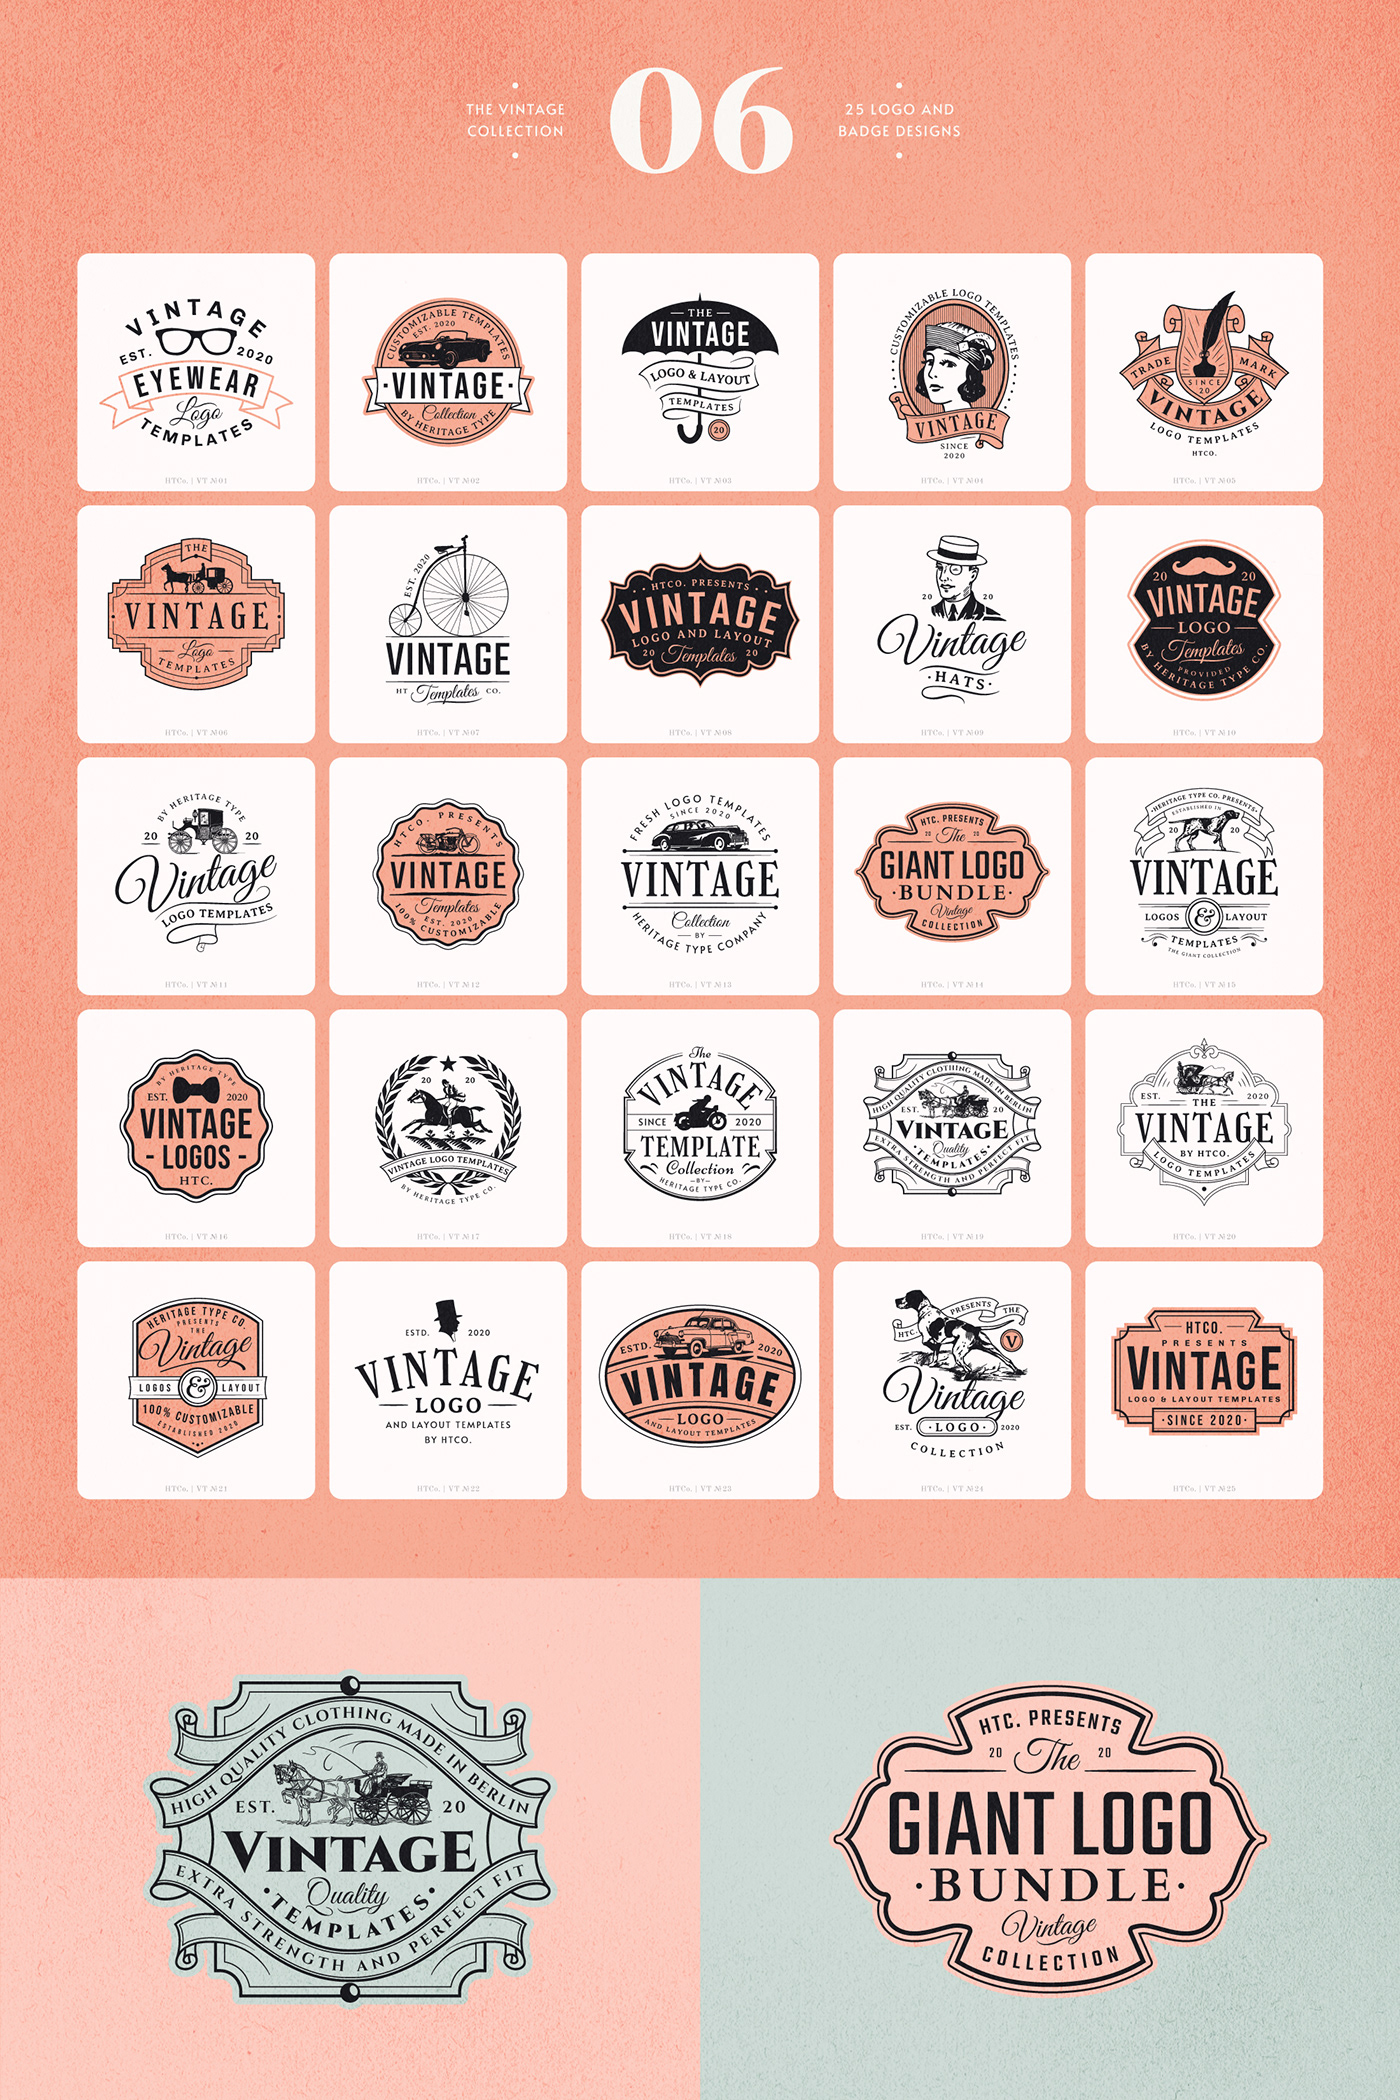 A collection of vintage logo templates